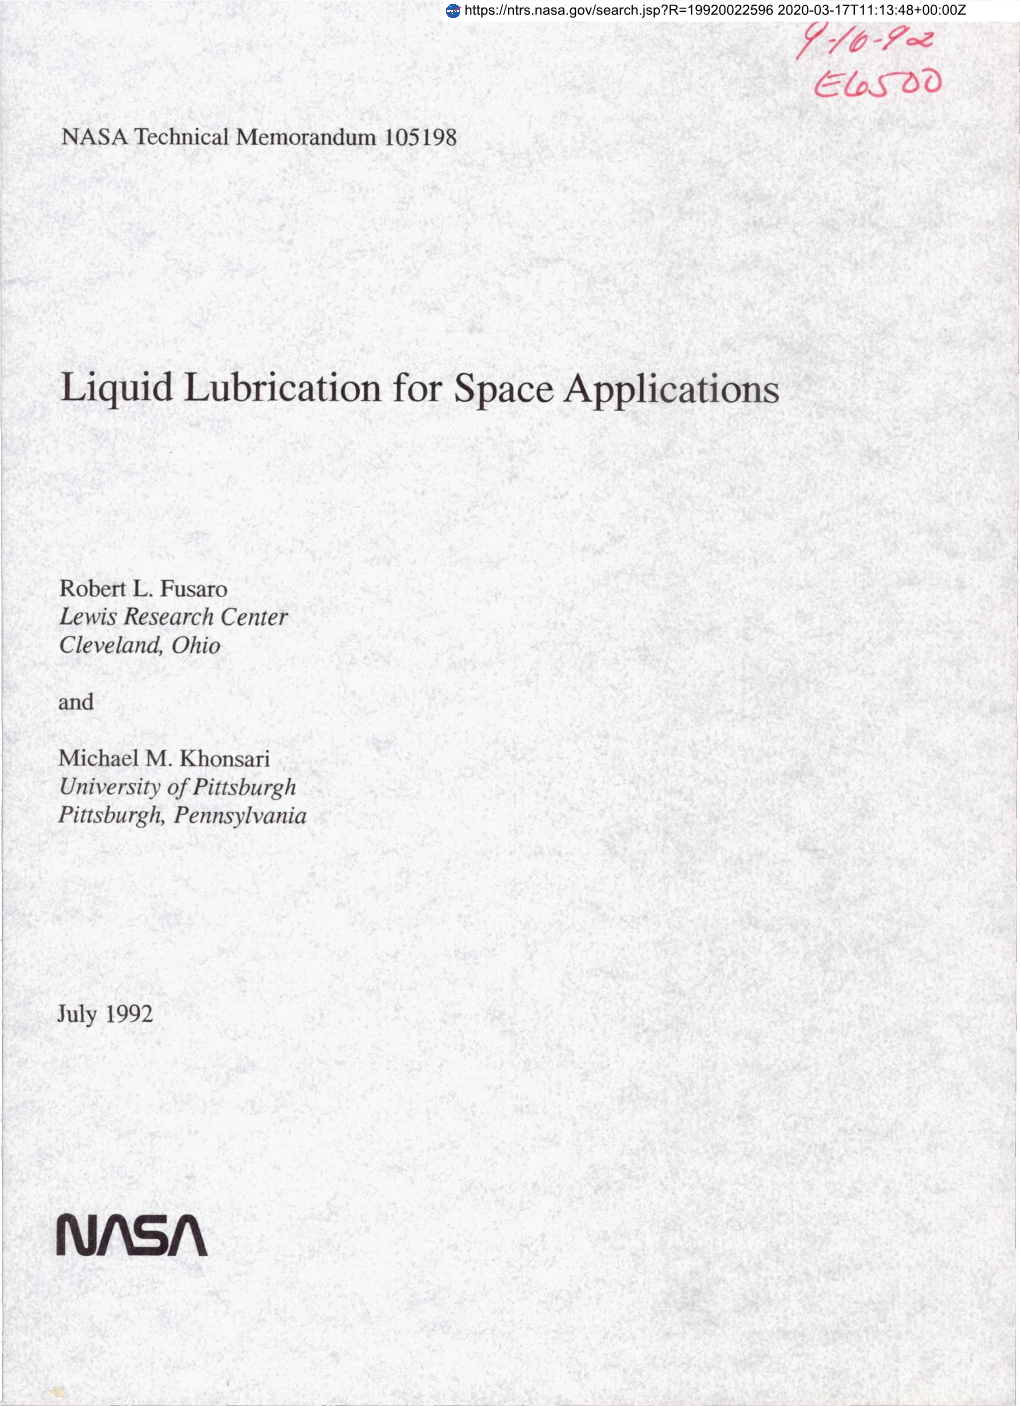 Liquid Lubrication for Space Applications